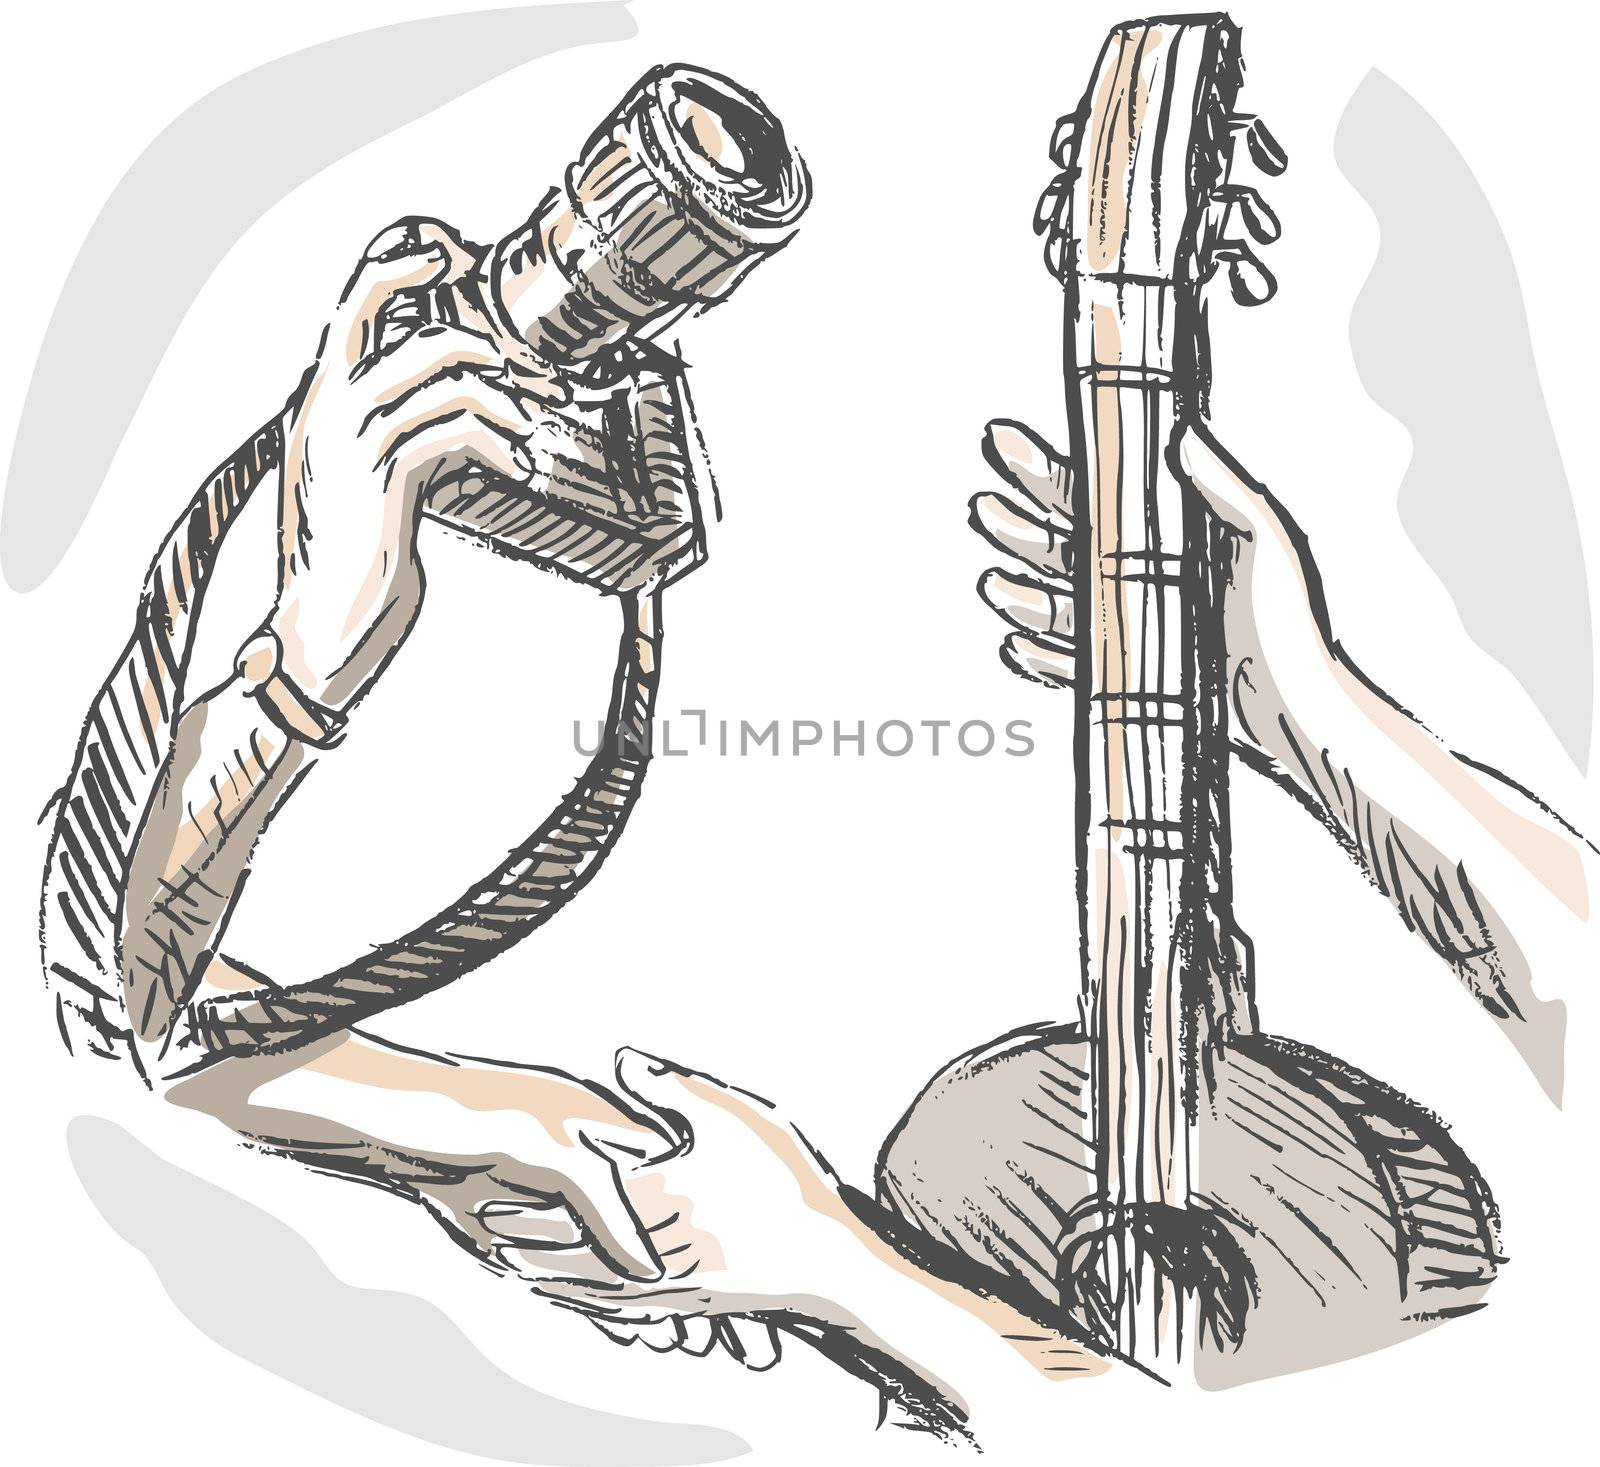 hand sketched illustration of Barter swapping hands with camera and guitar